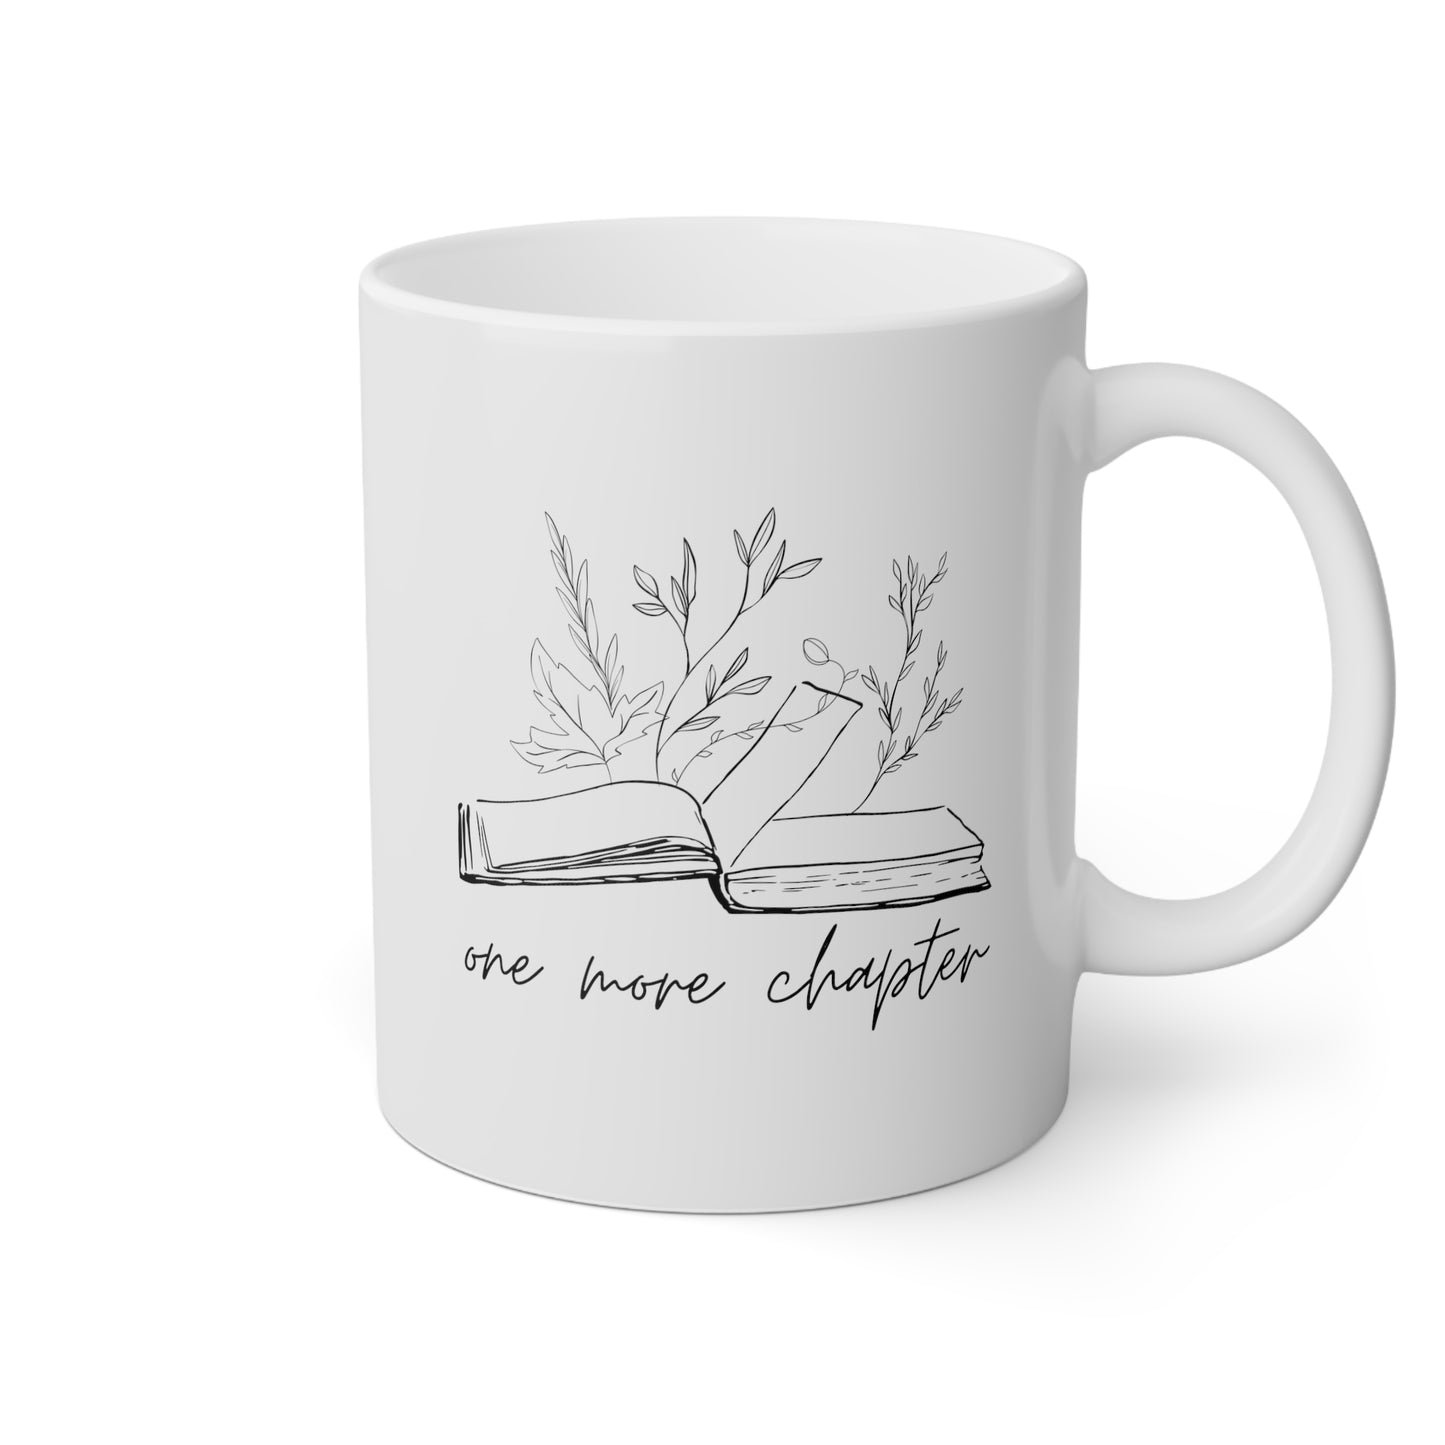 One More Chapter 11oz white funny large coffee mug gift for bookworm reading trending now women librarian book lover teacher nerd waveywares wavey wares wavywares wavy wares